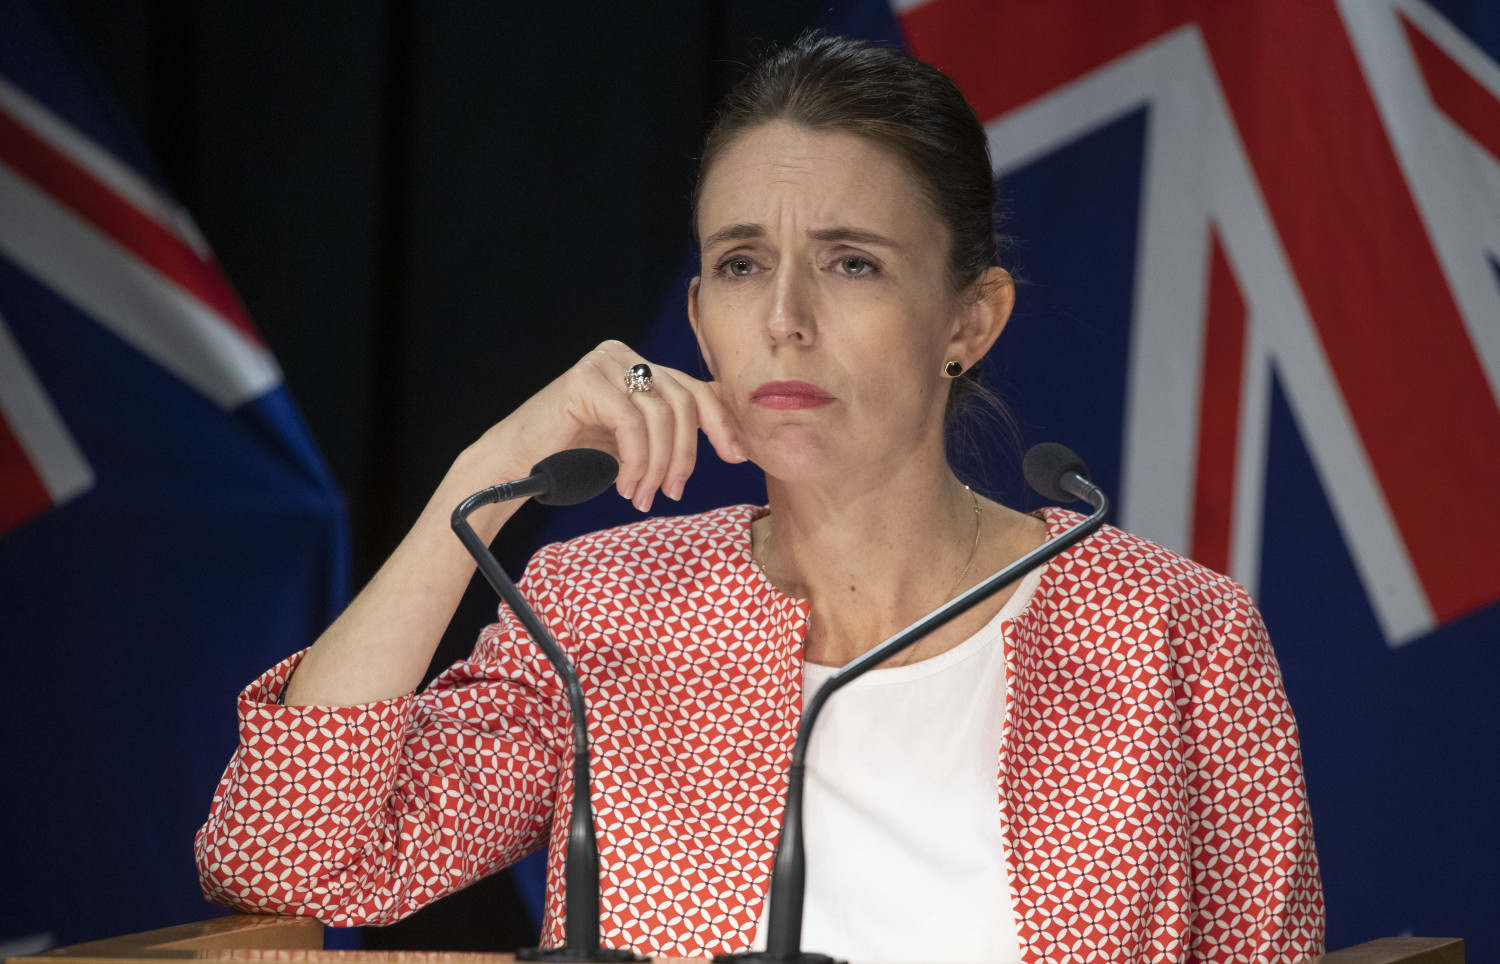 New Zealand Prime Minister Jacinda Ardern said her government will draft legislation to lower the country’s legal voting age to 16.